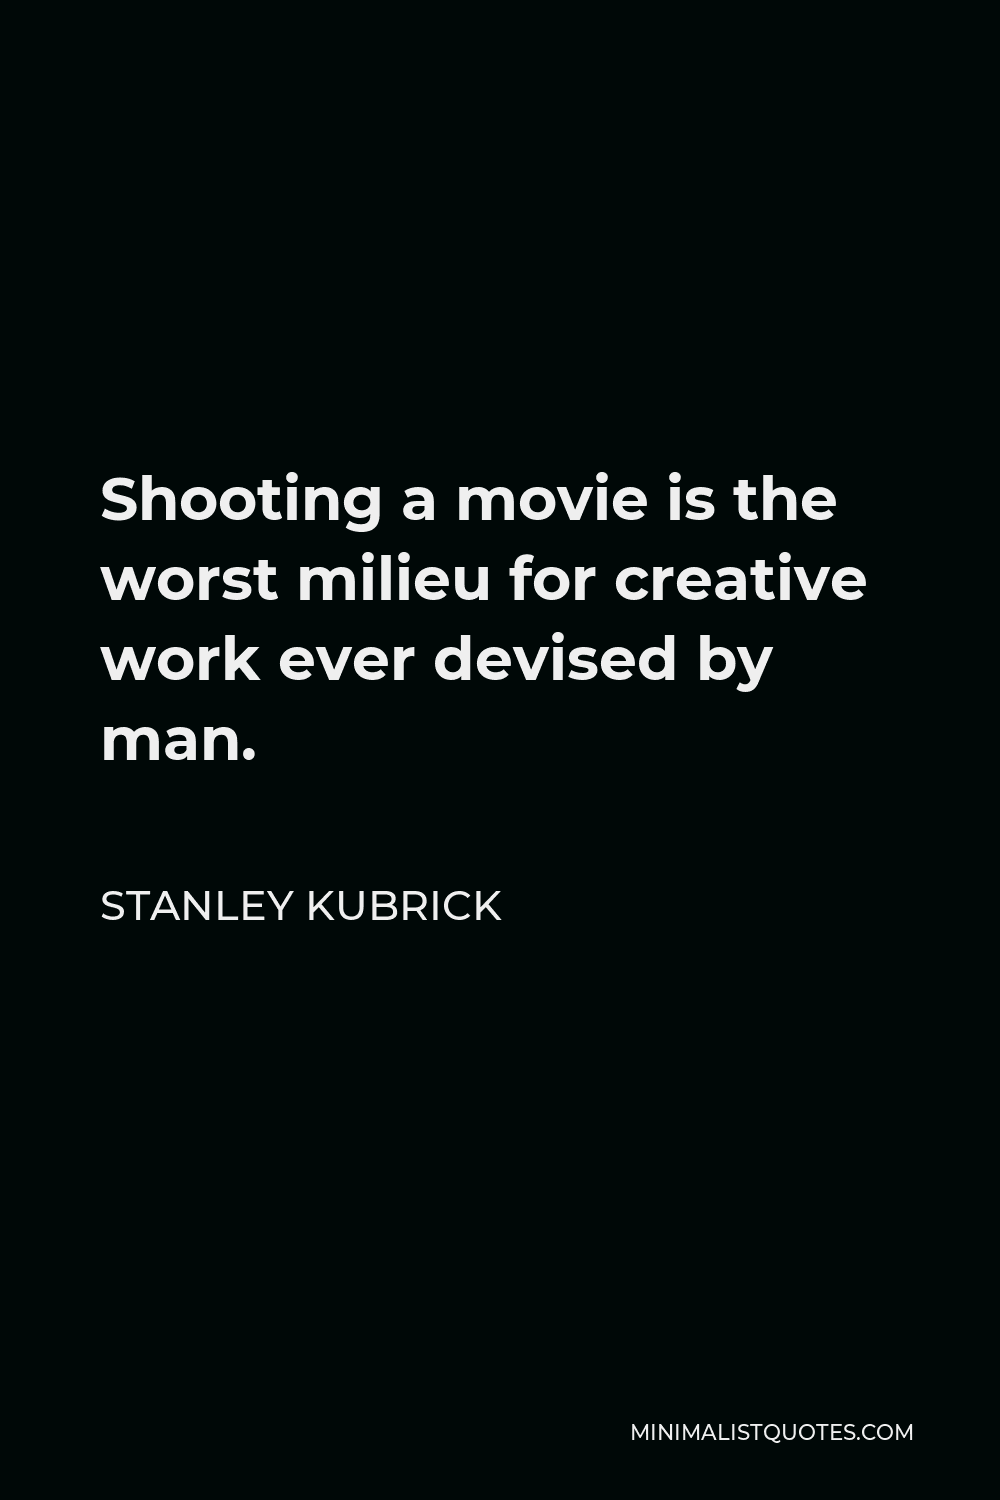 Stanley Kubrick Quote: Shooting a movie is the worst milieu for ...